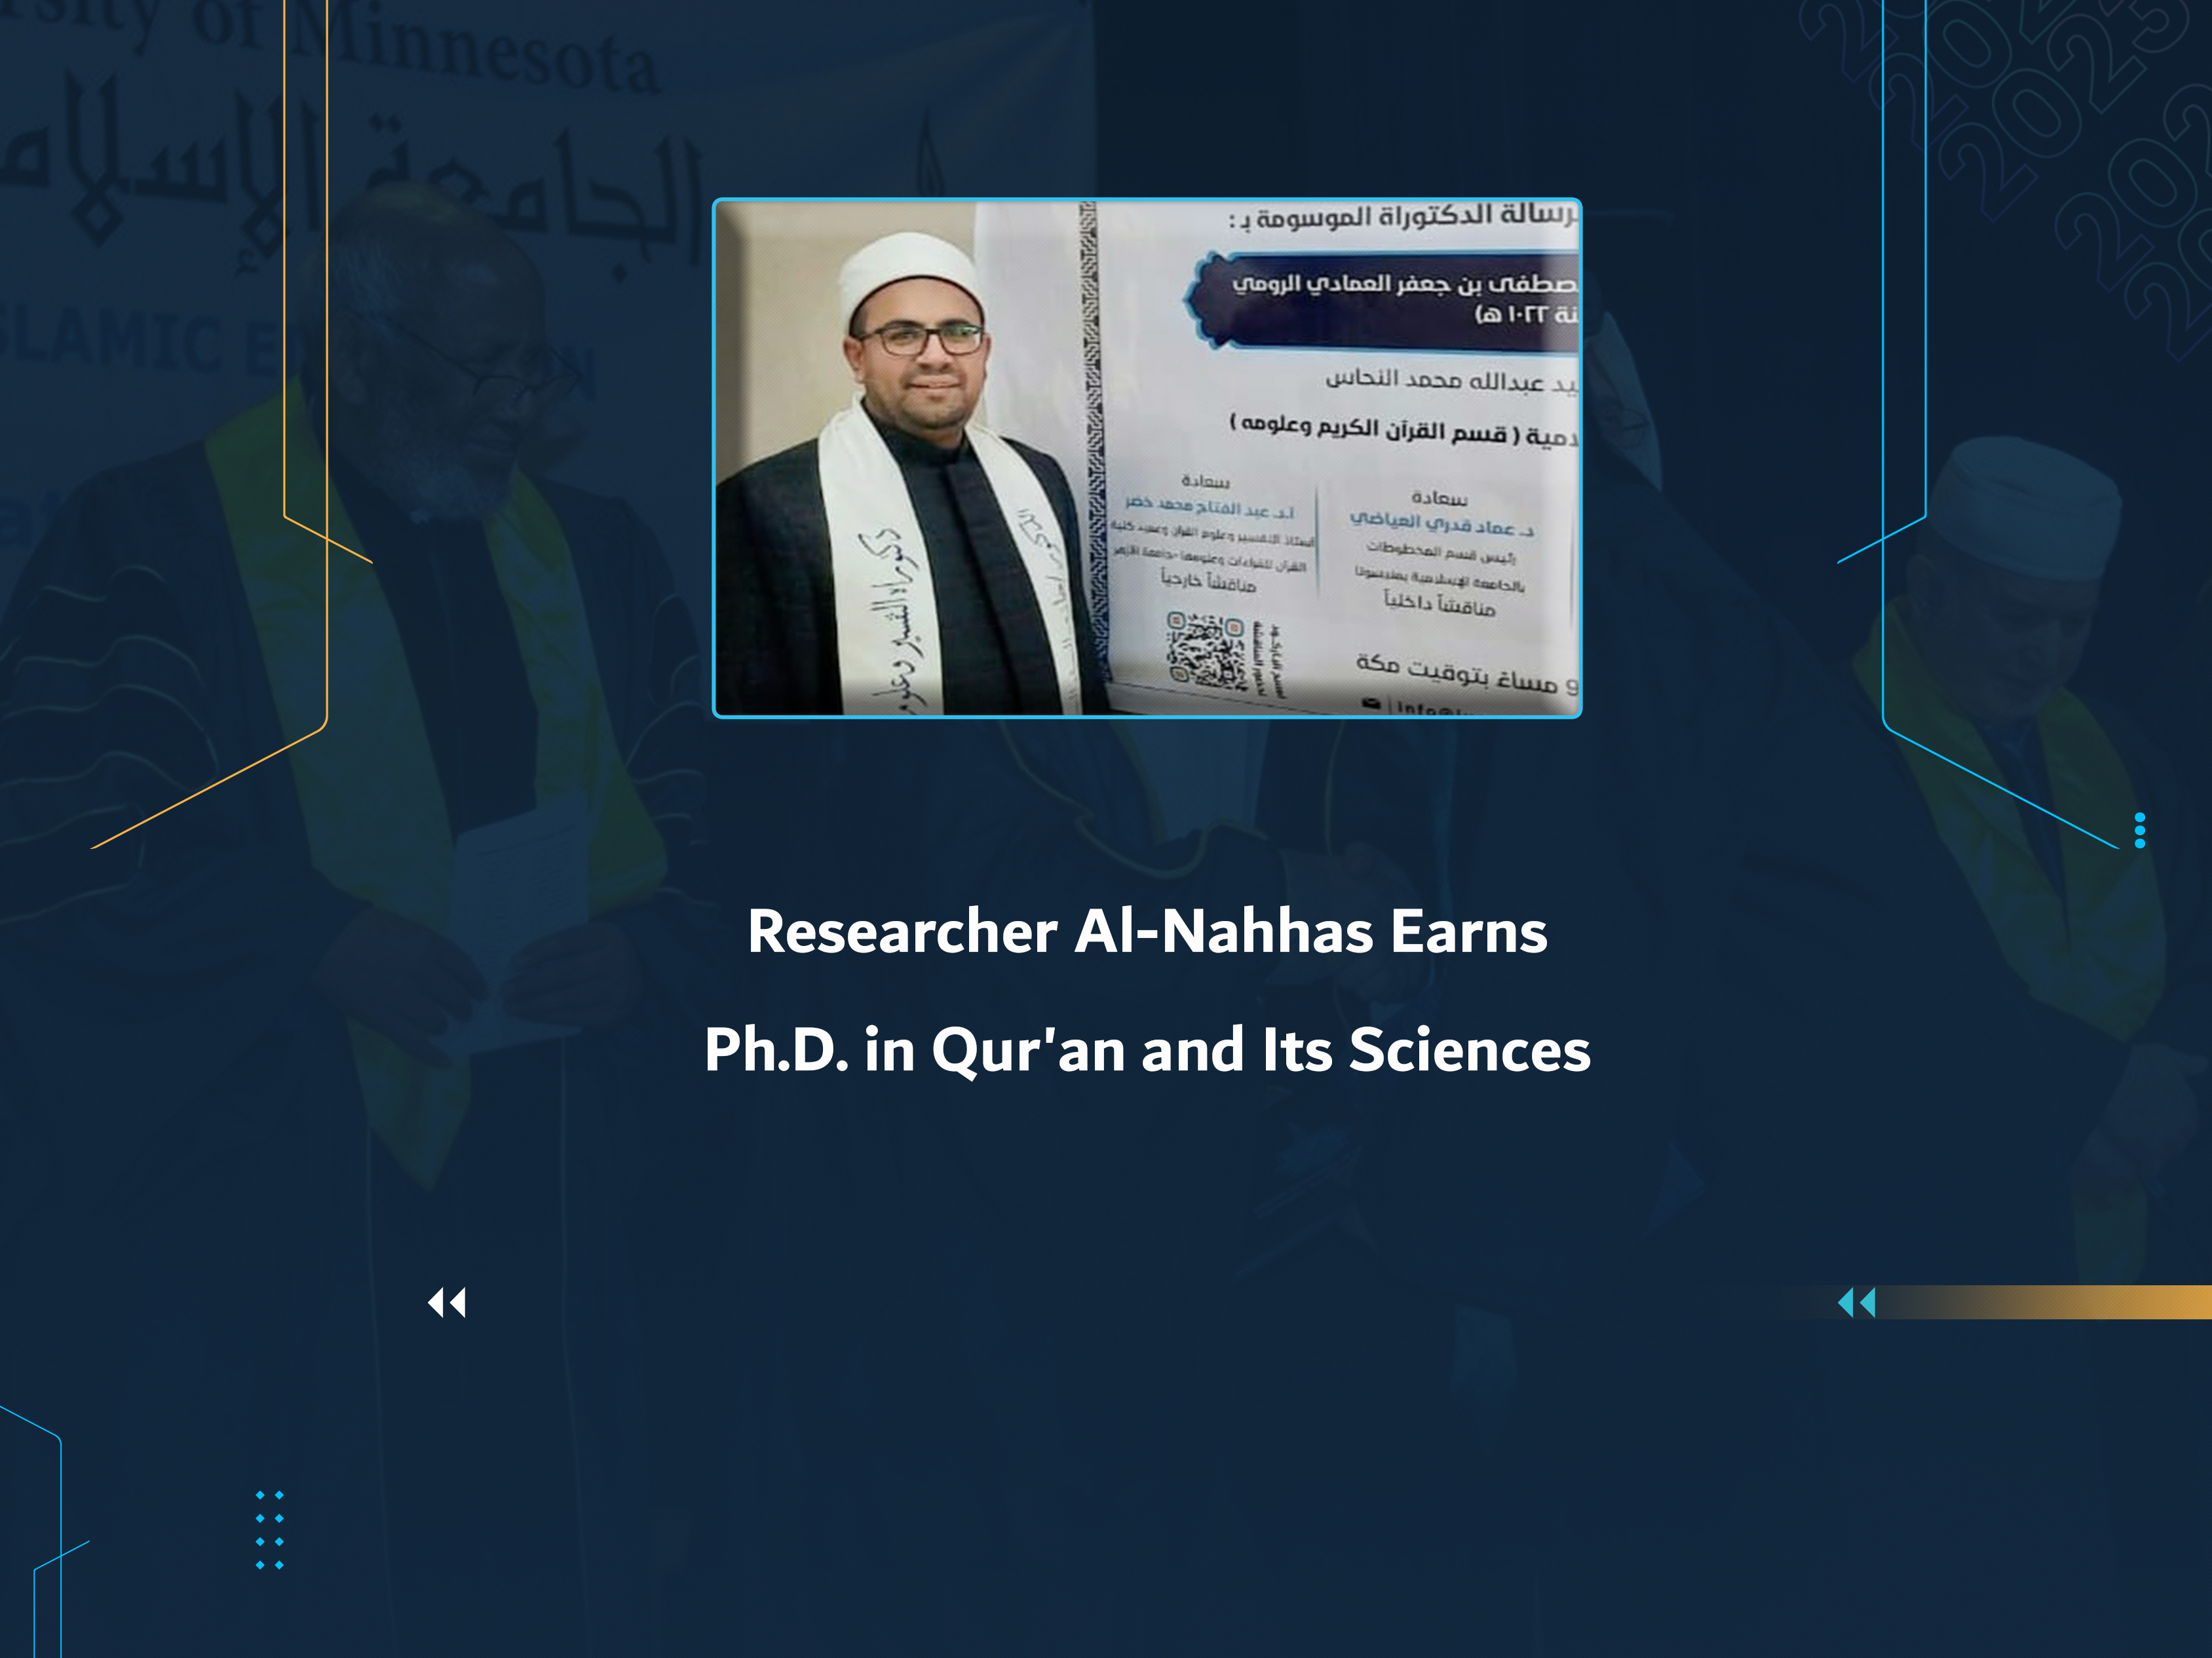 Researcher Al-Nahhas Earns Ph.D. in Qur'an and Its Sciences